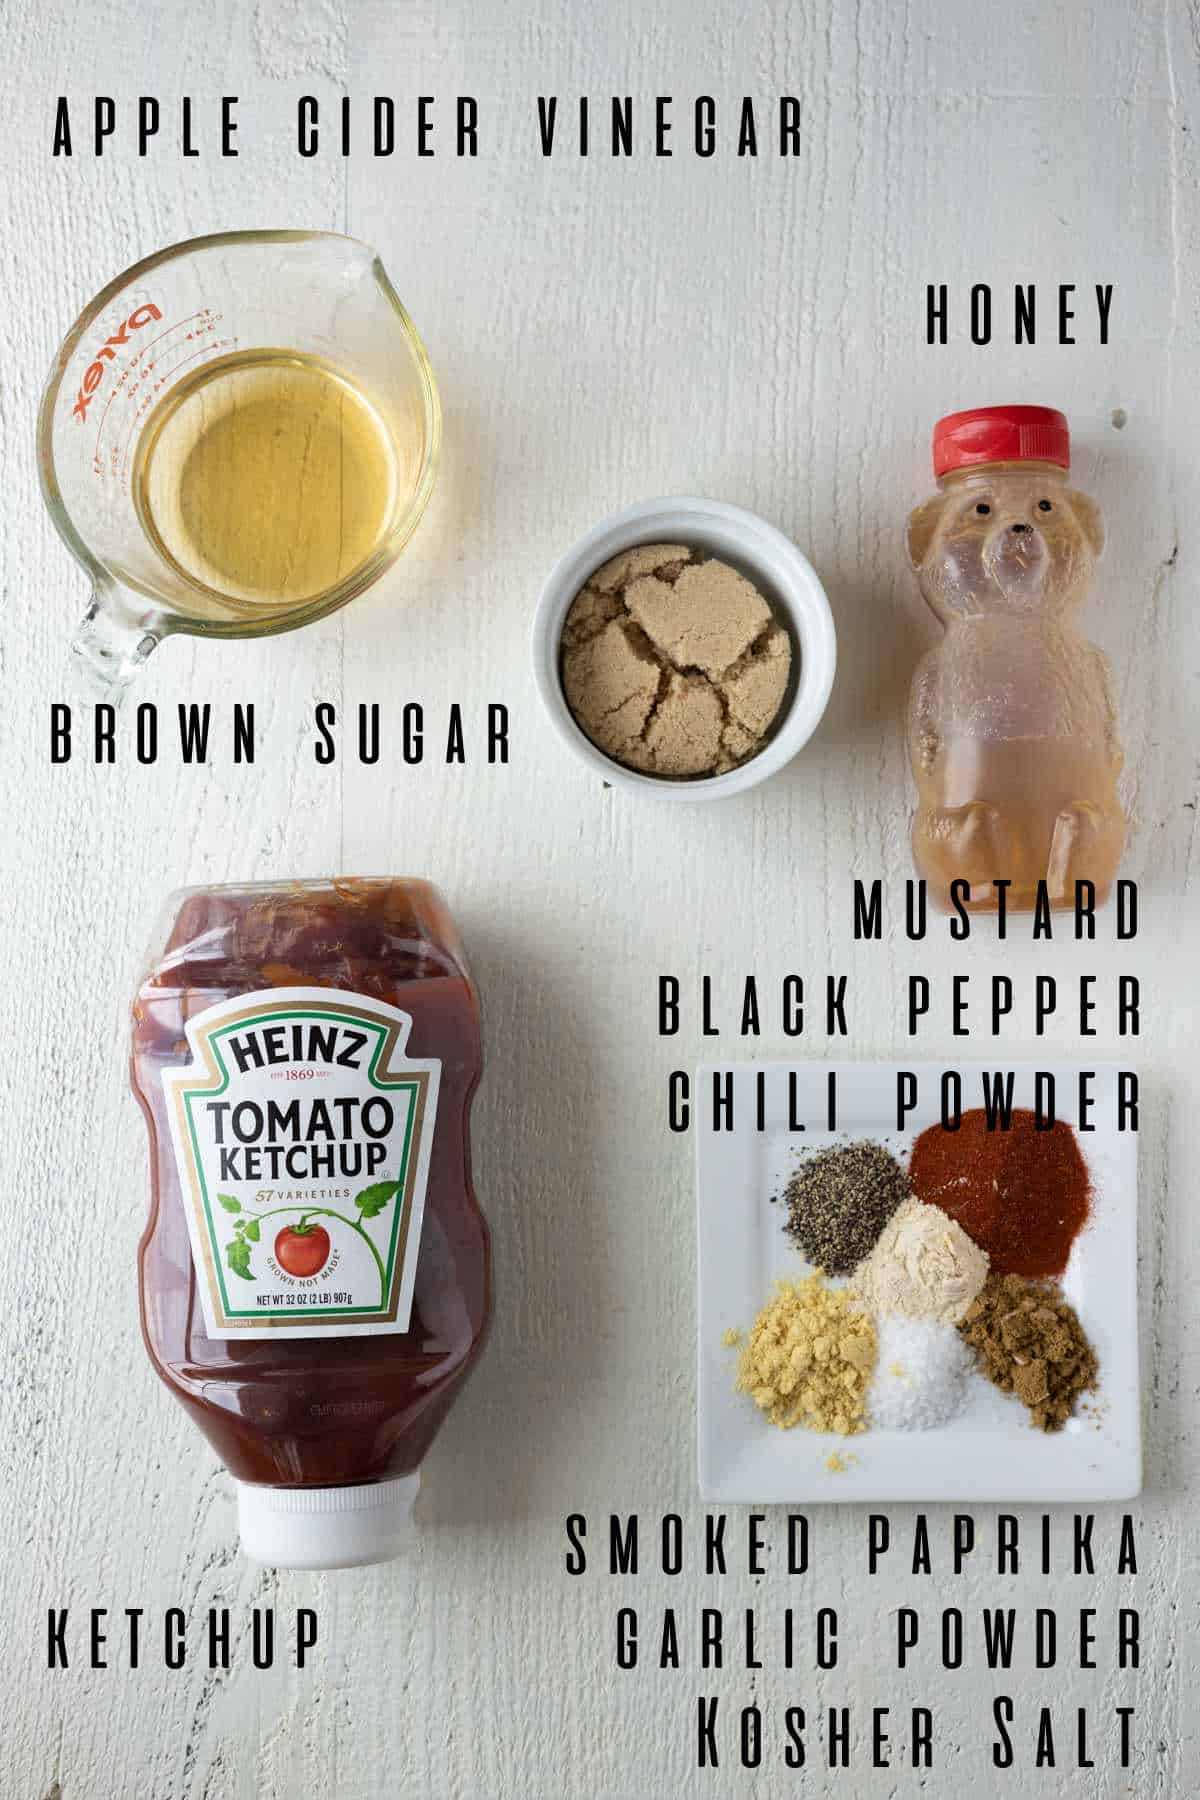 Ingredients needed to make homemade bbq sauce including ketchup, apple cider vinegar, brown sugar, and honey.